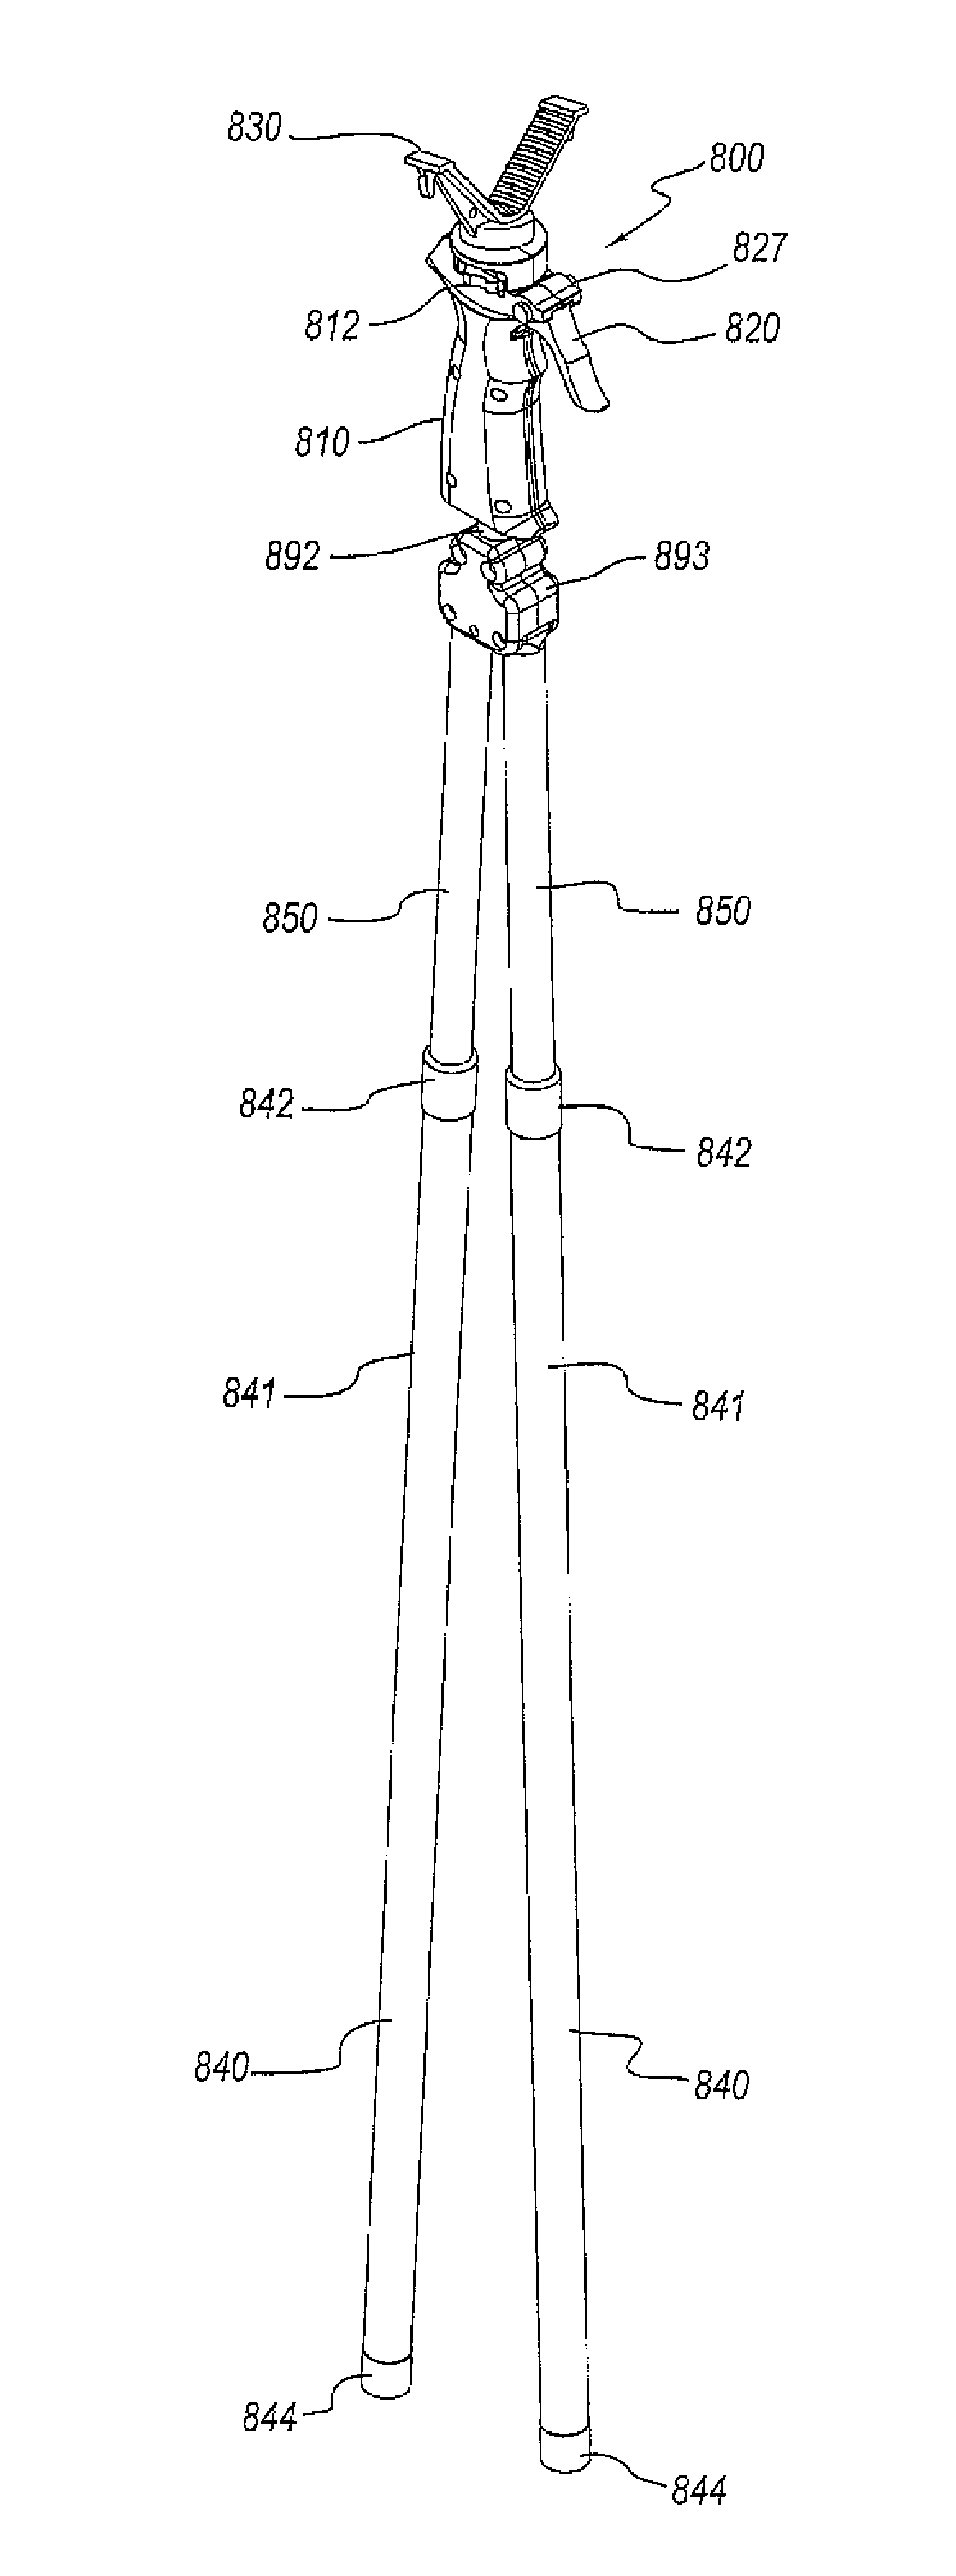 Telescoping support stand apparatus